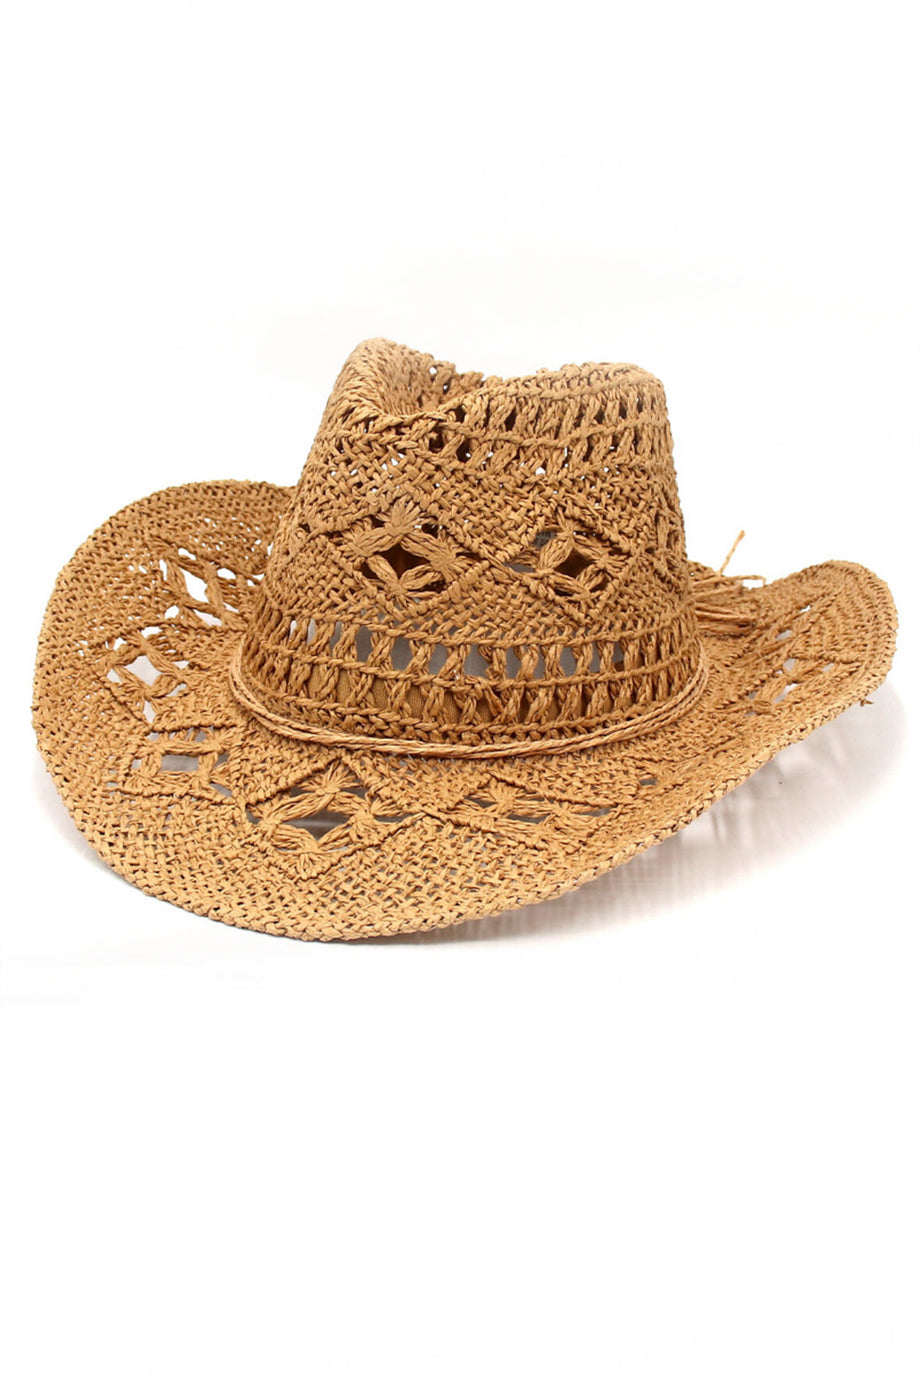 Solid Hollow-Out Woven Denim Straw Hat White / One Size